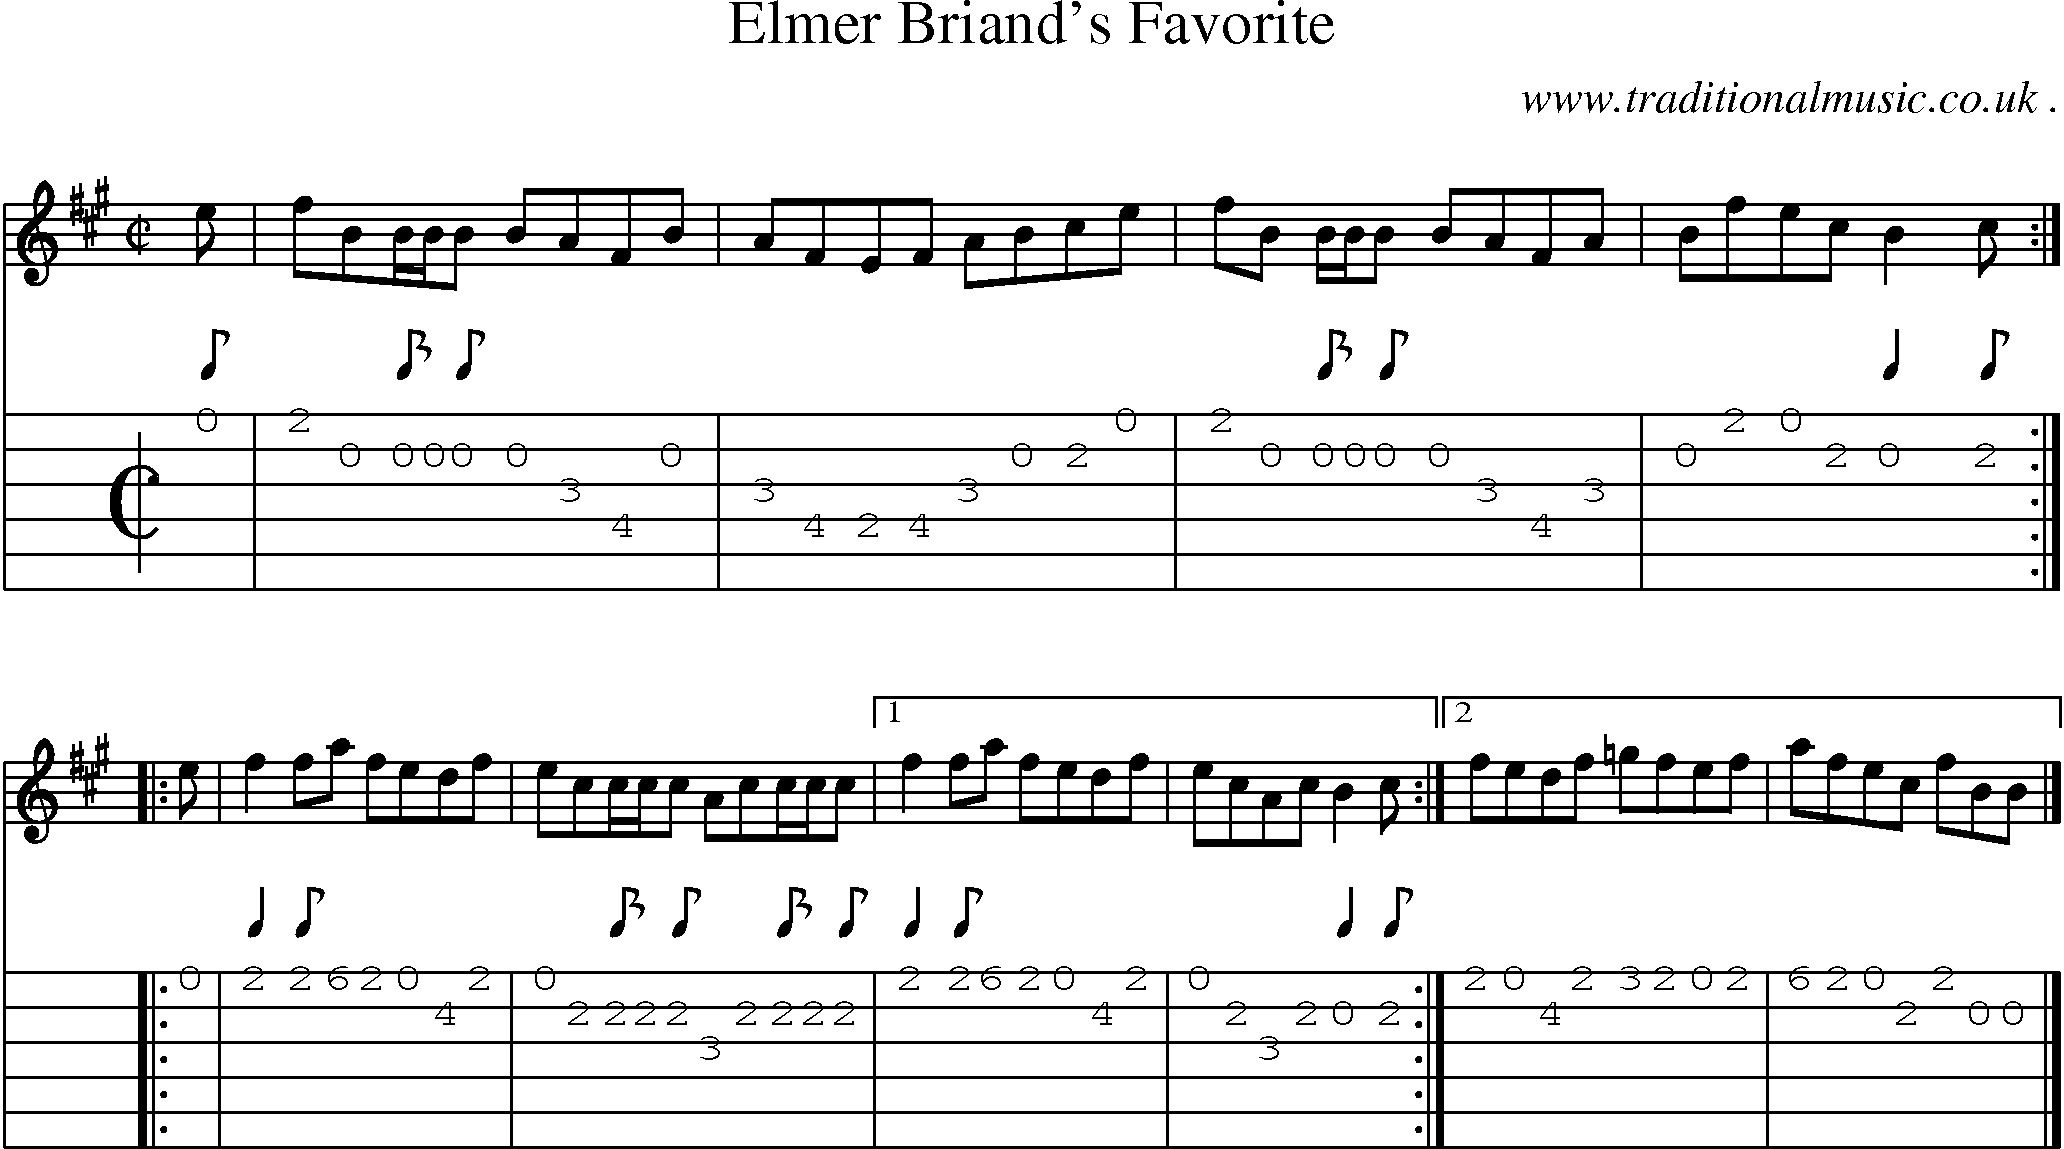 Sheet-music  score, Chords and Guitar Tabs for Elmer Briands Favorite